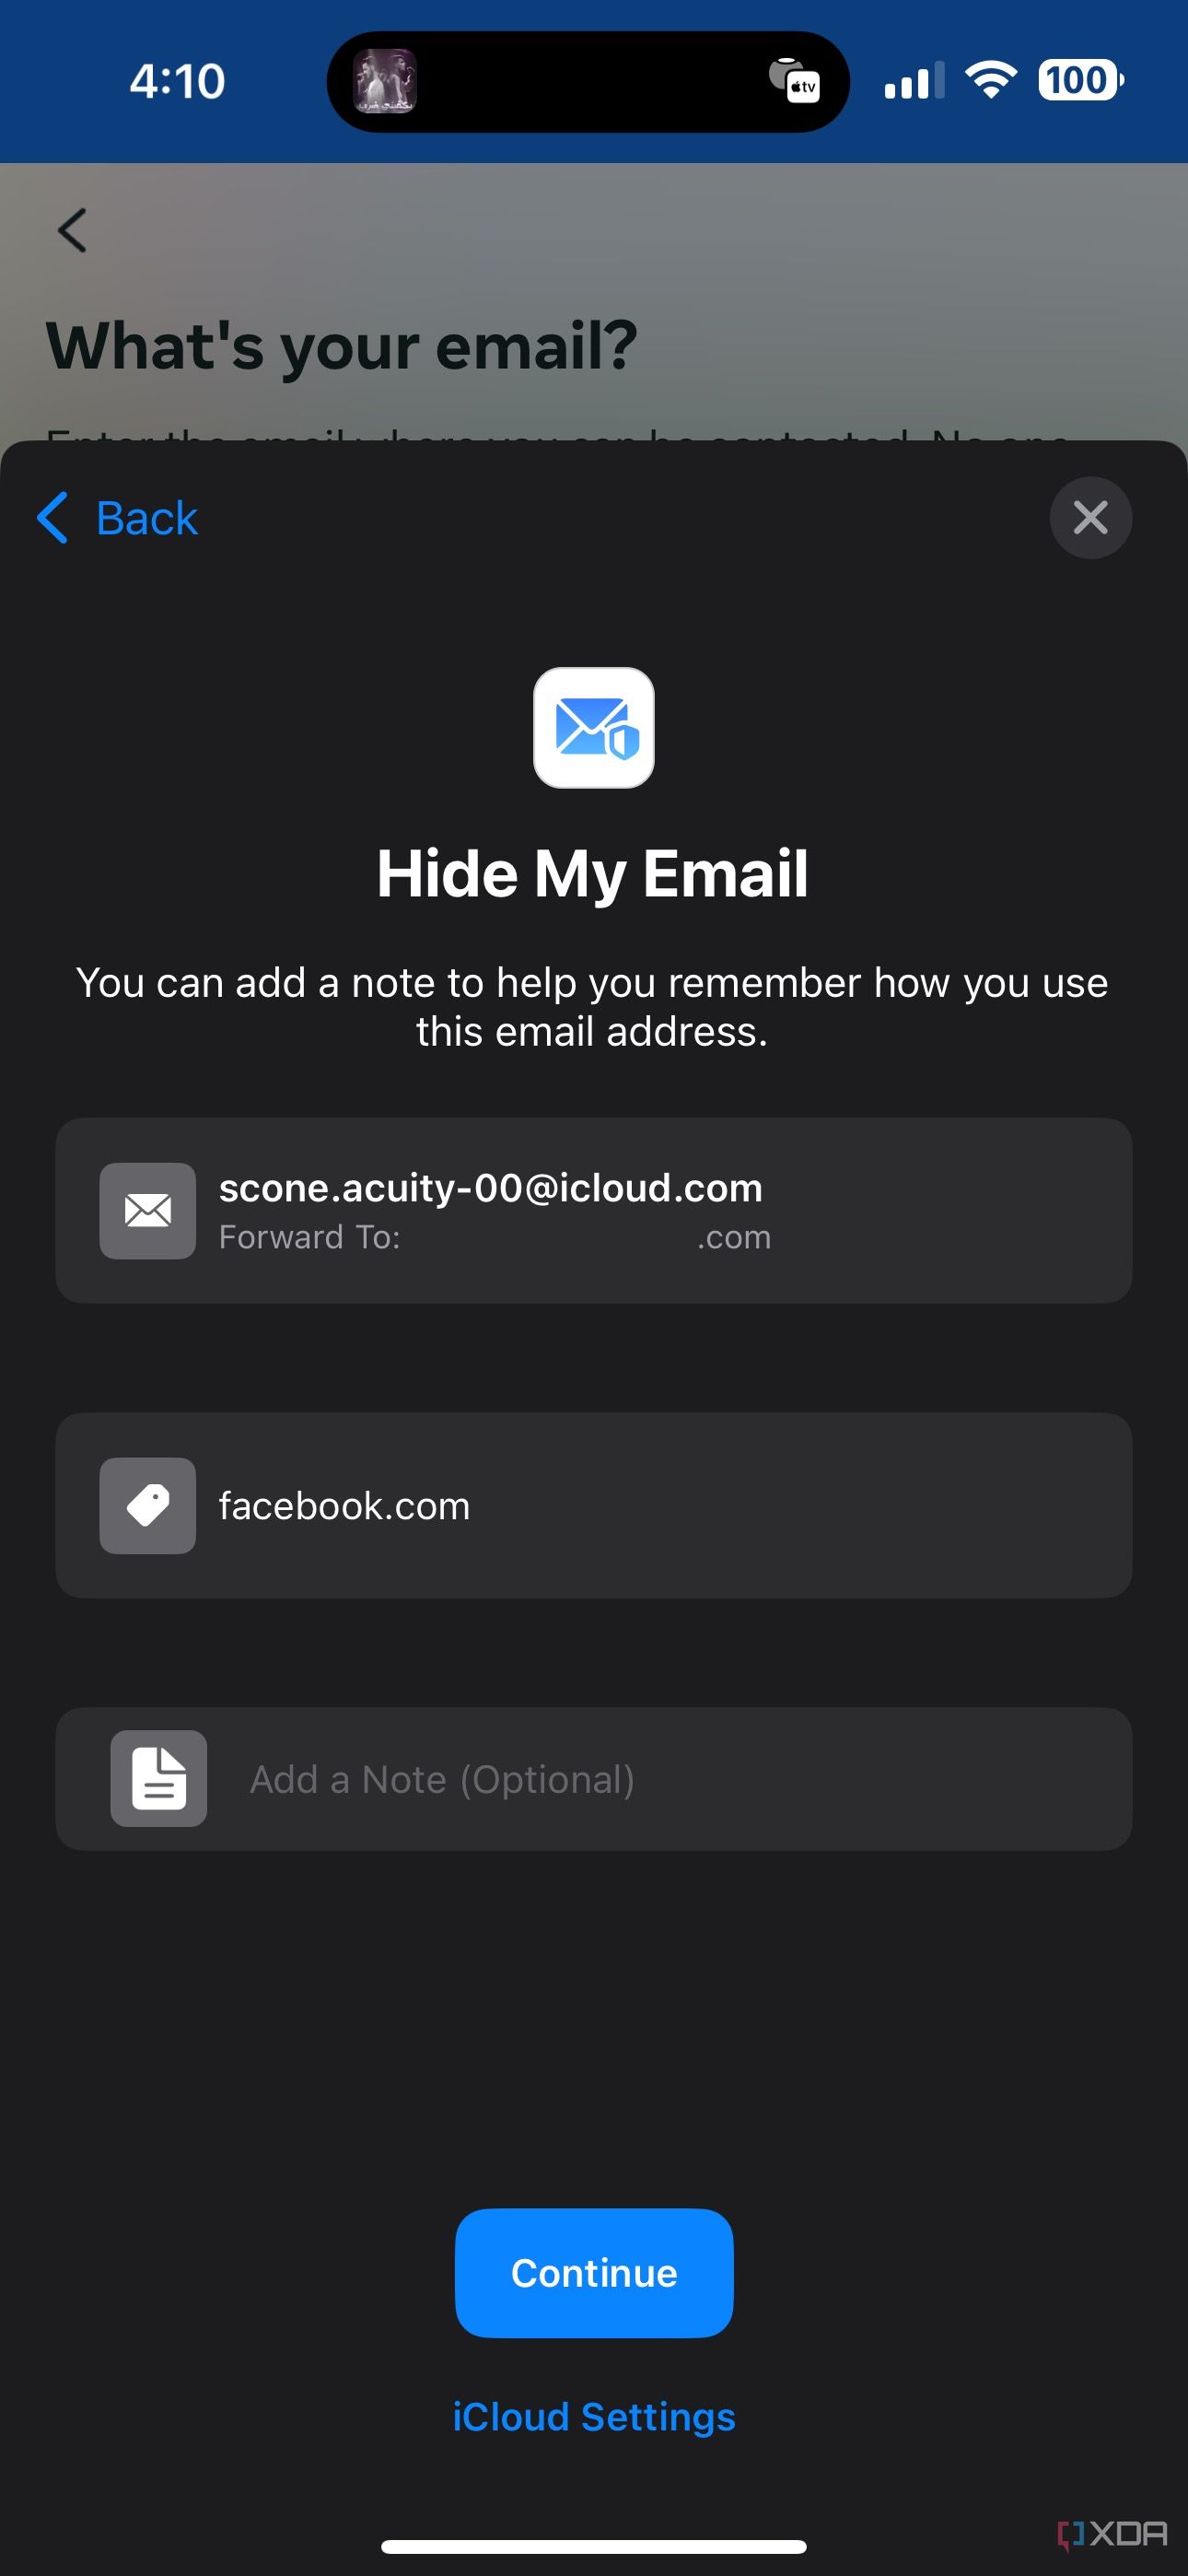 hide my email setup through keyboard showing alias, label, and note